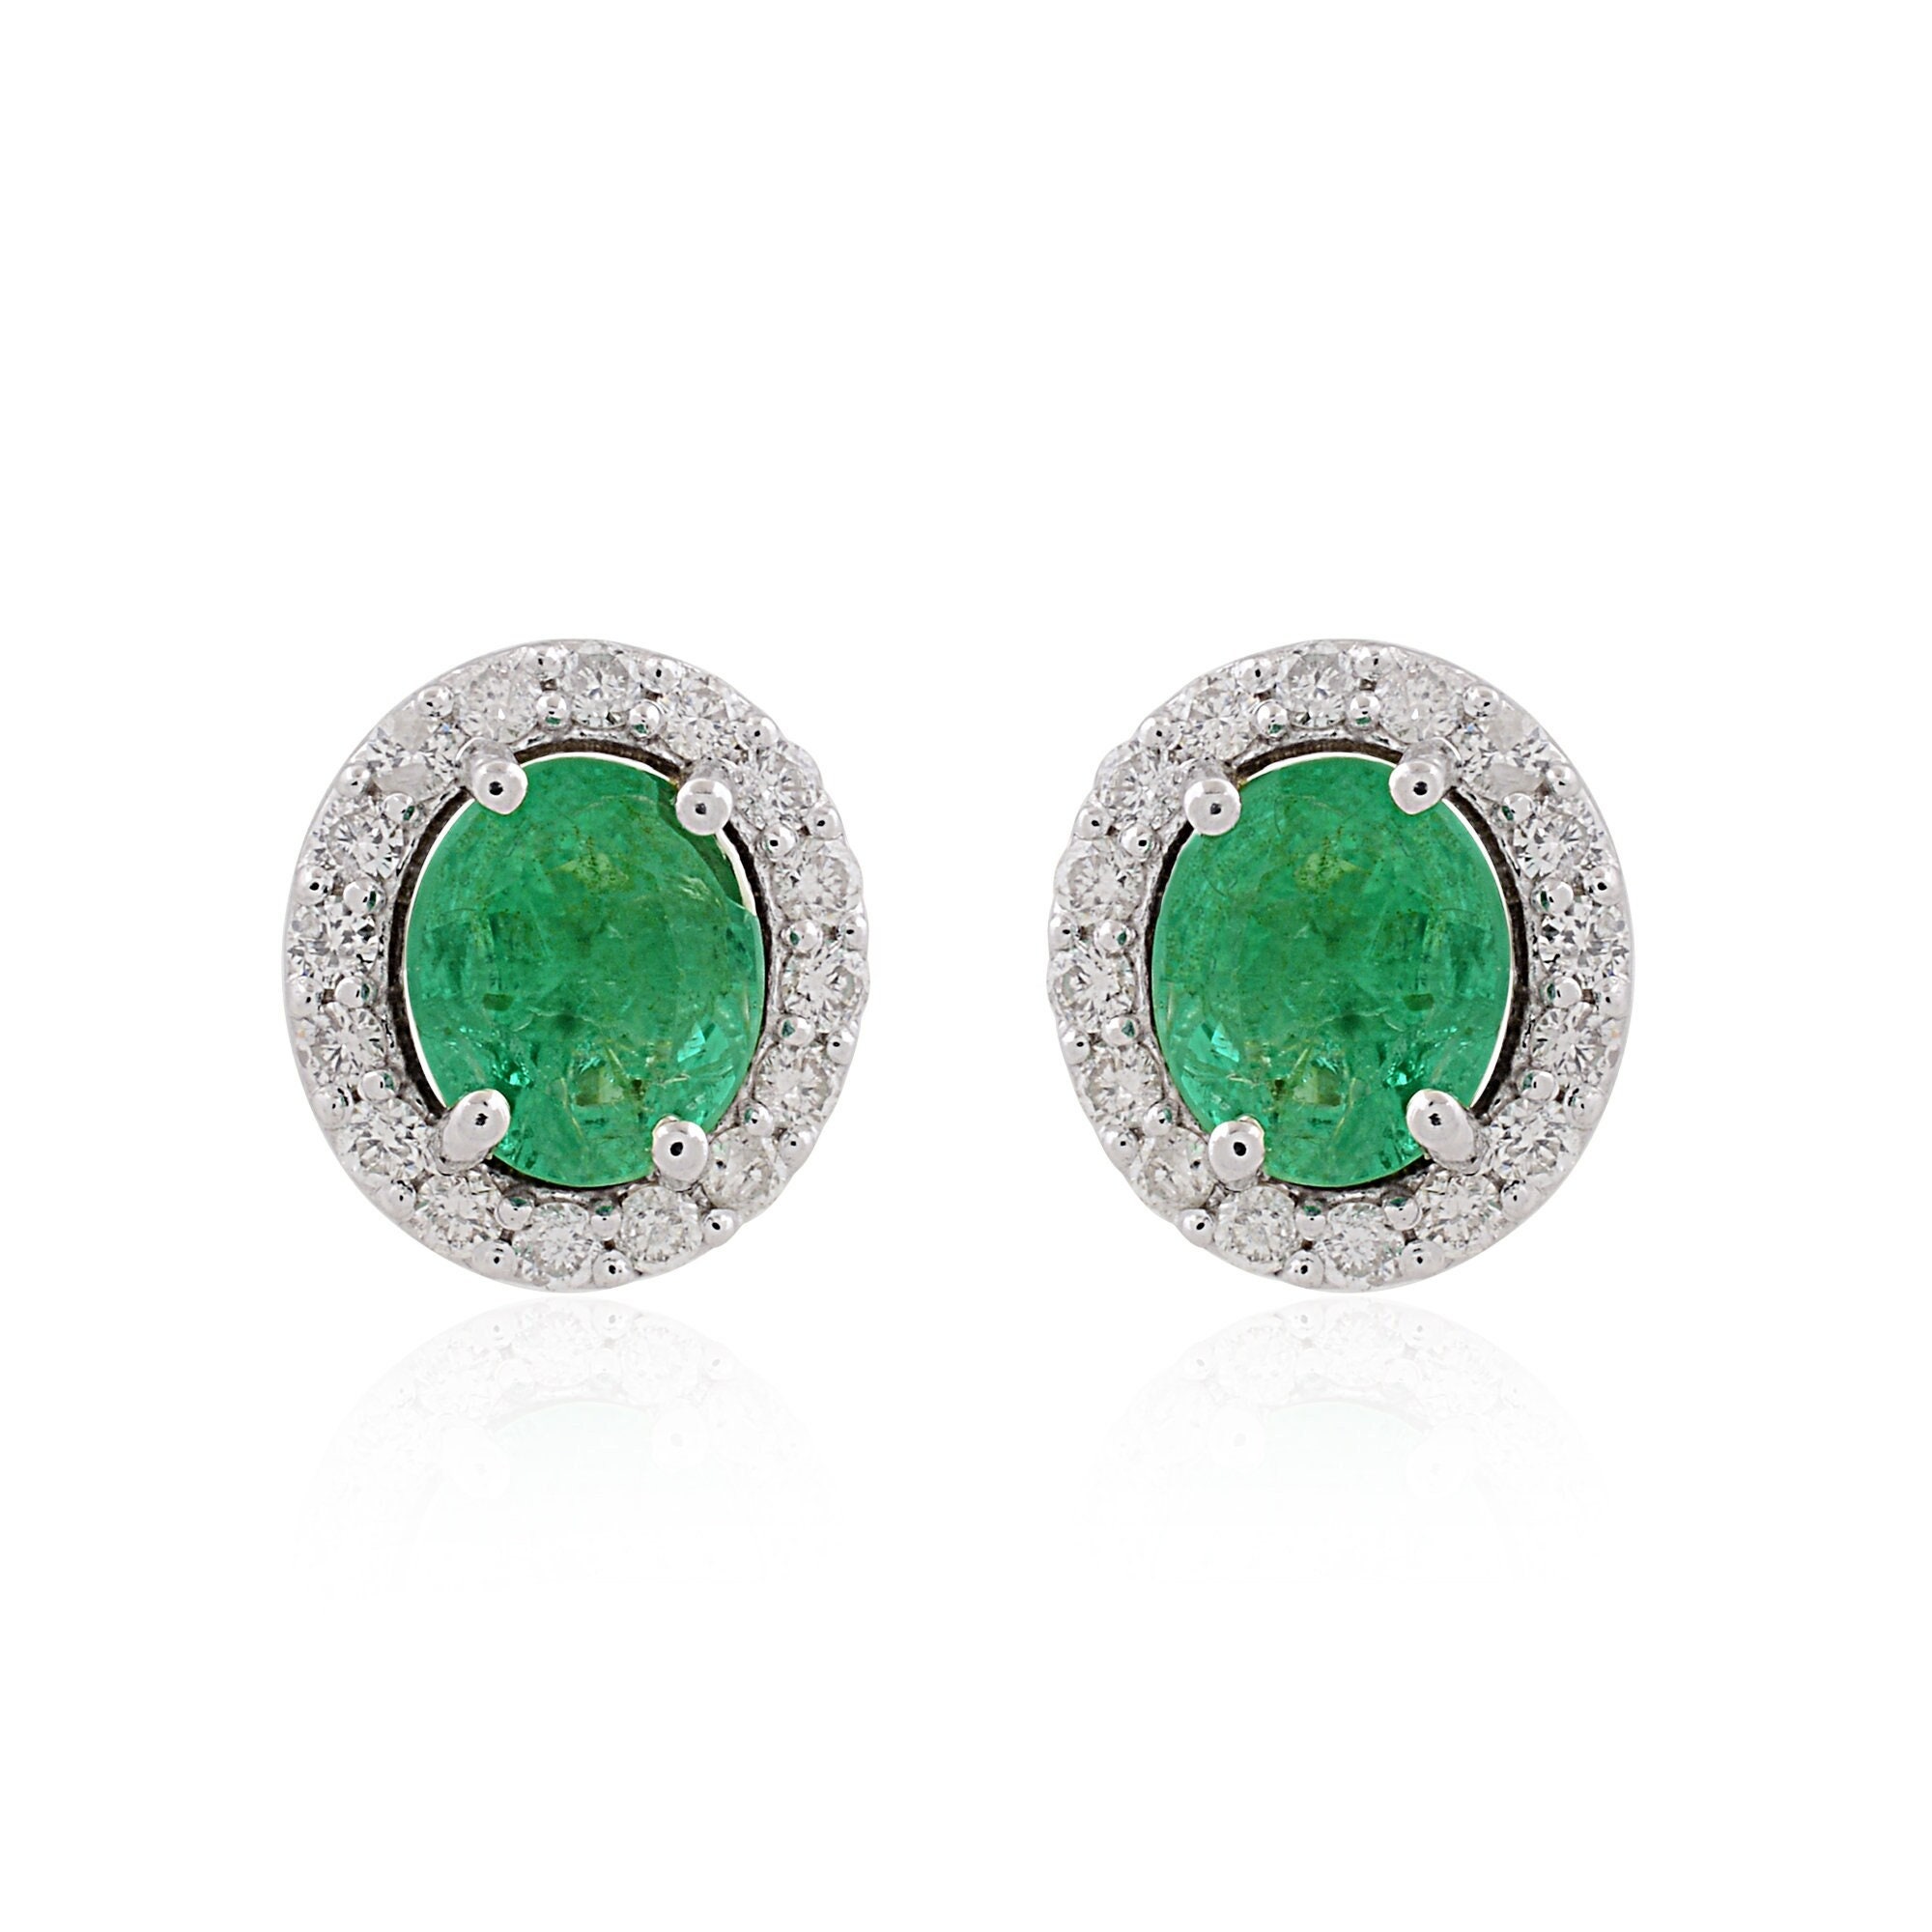 Natural Oval Cut Emerald Stud Earrings With Halo Diamonds in 10K Solid Gold May Birthstone Jewelry Anniversary Gift For Her